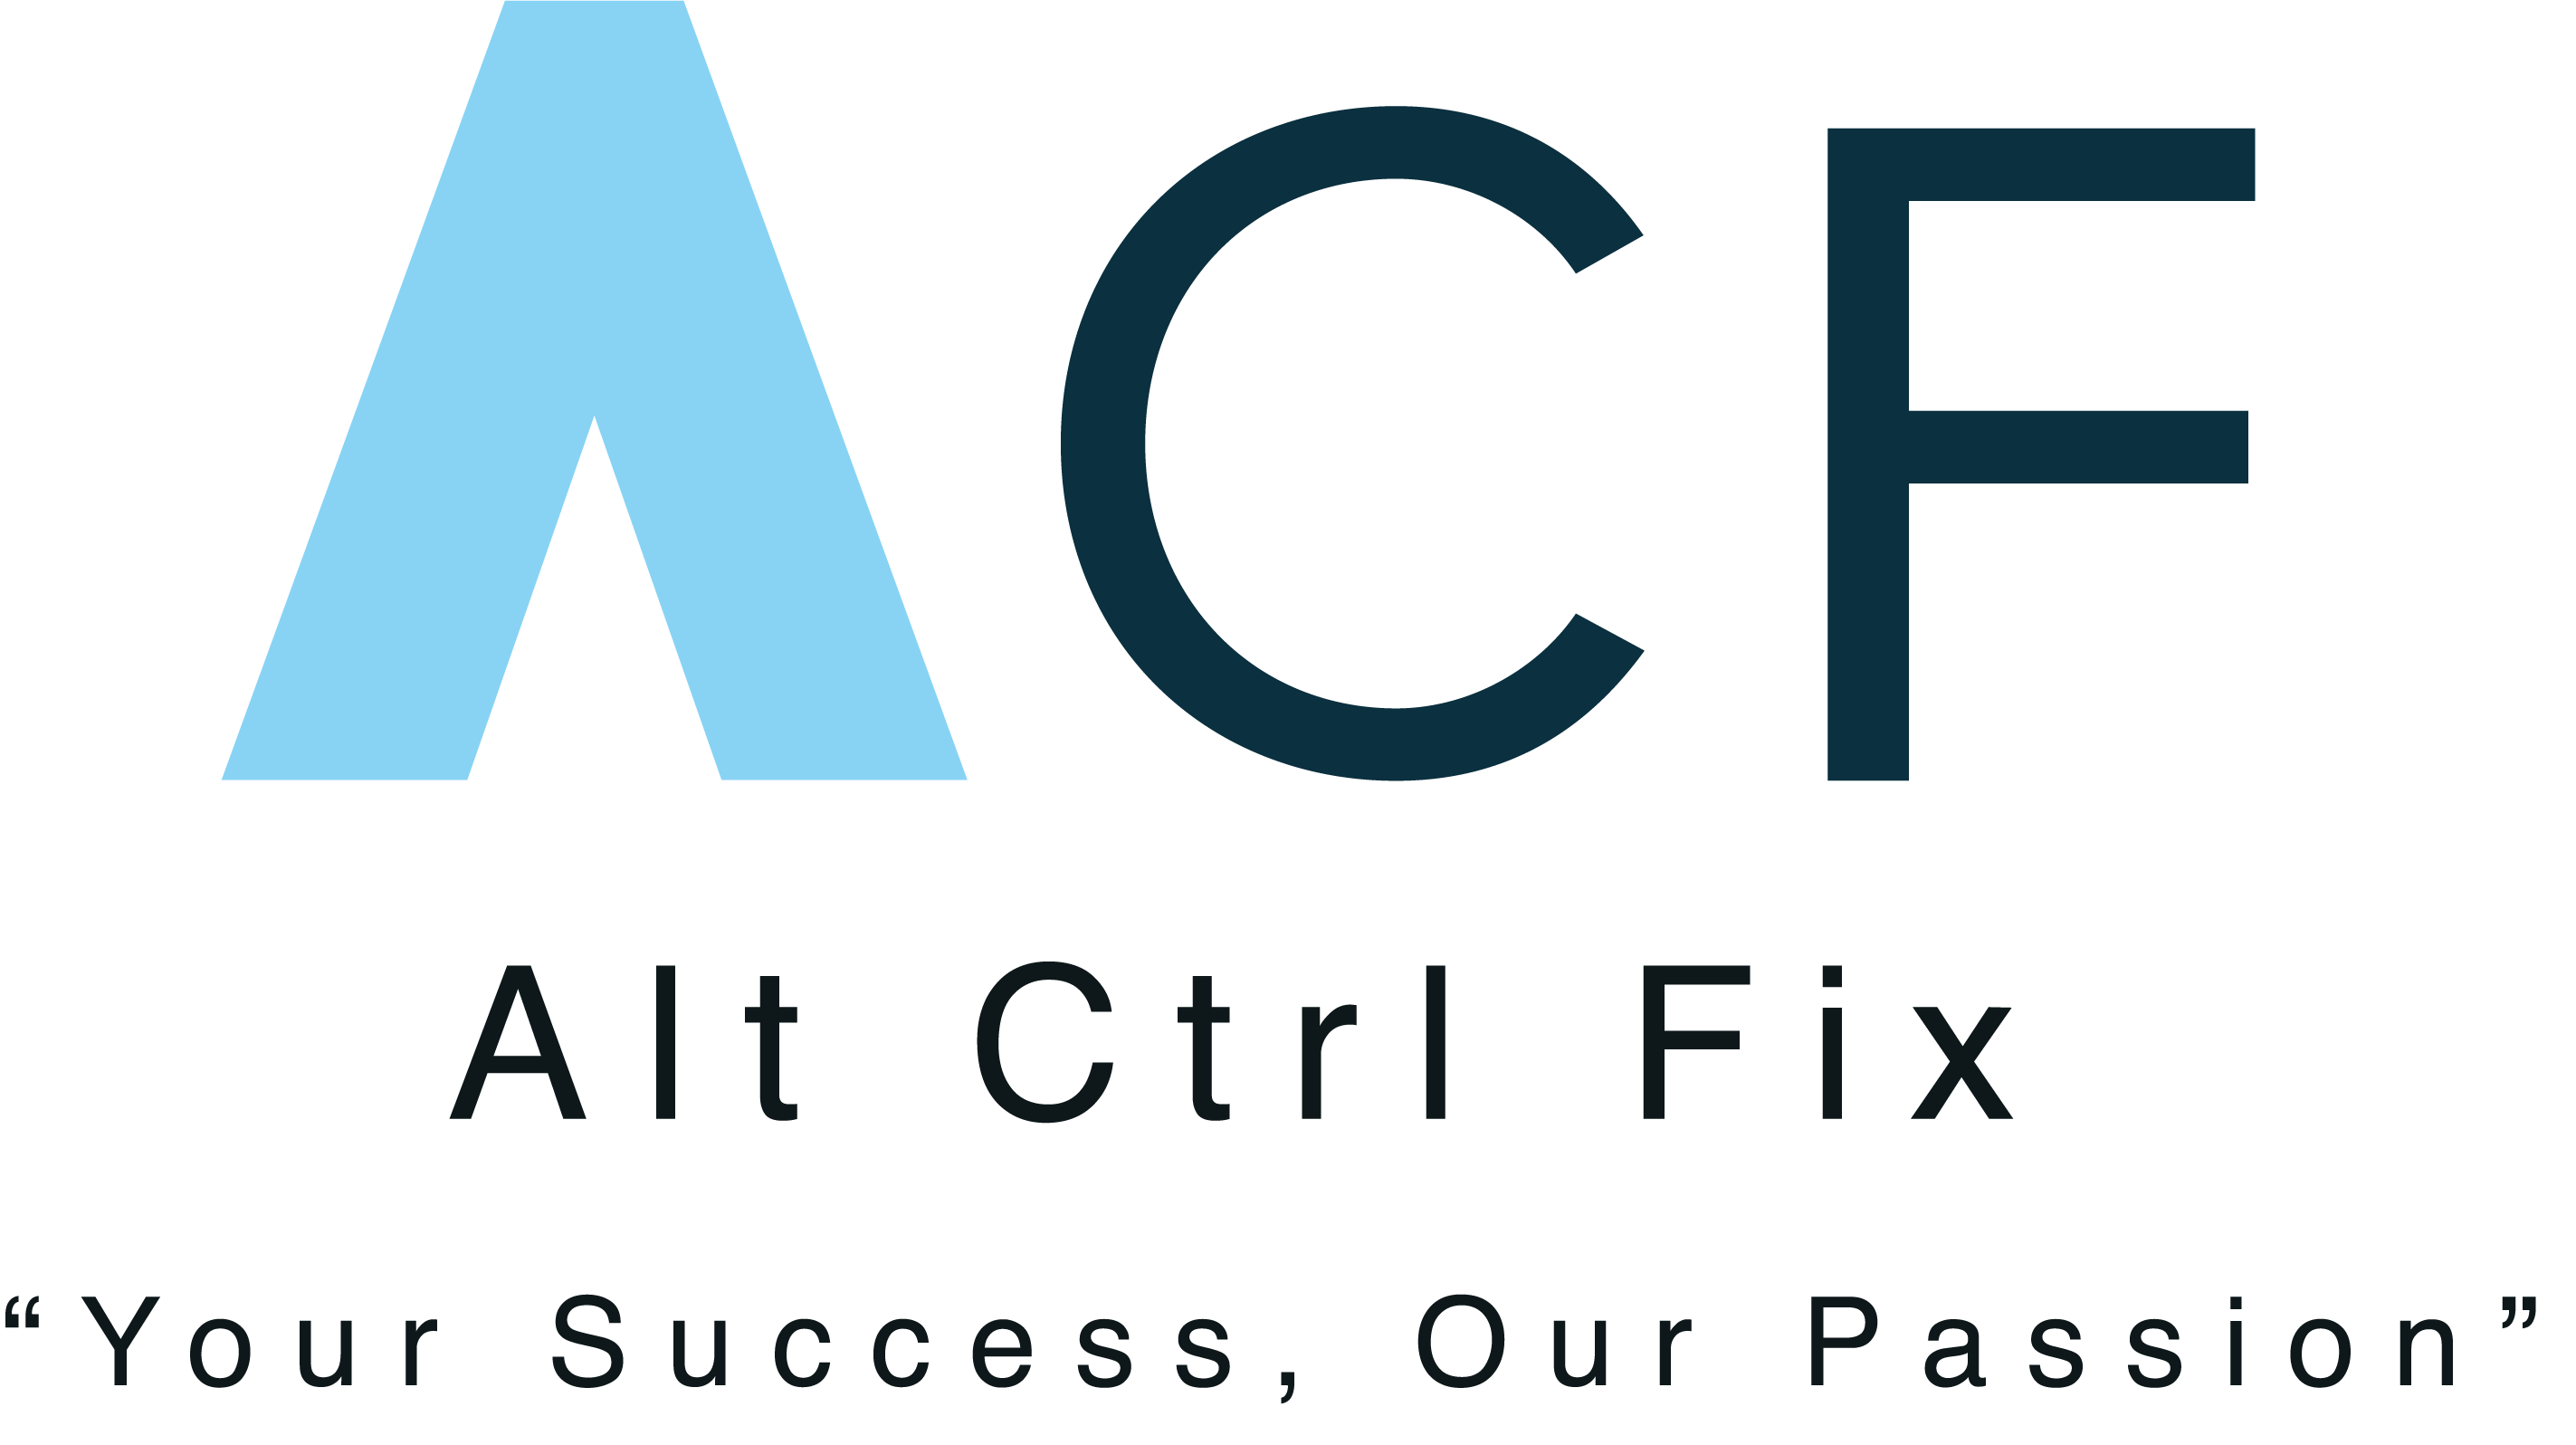 AltCtrlFix Softwares and Business Consultancy Services logo